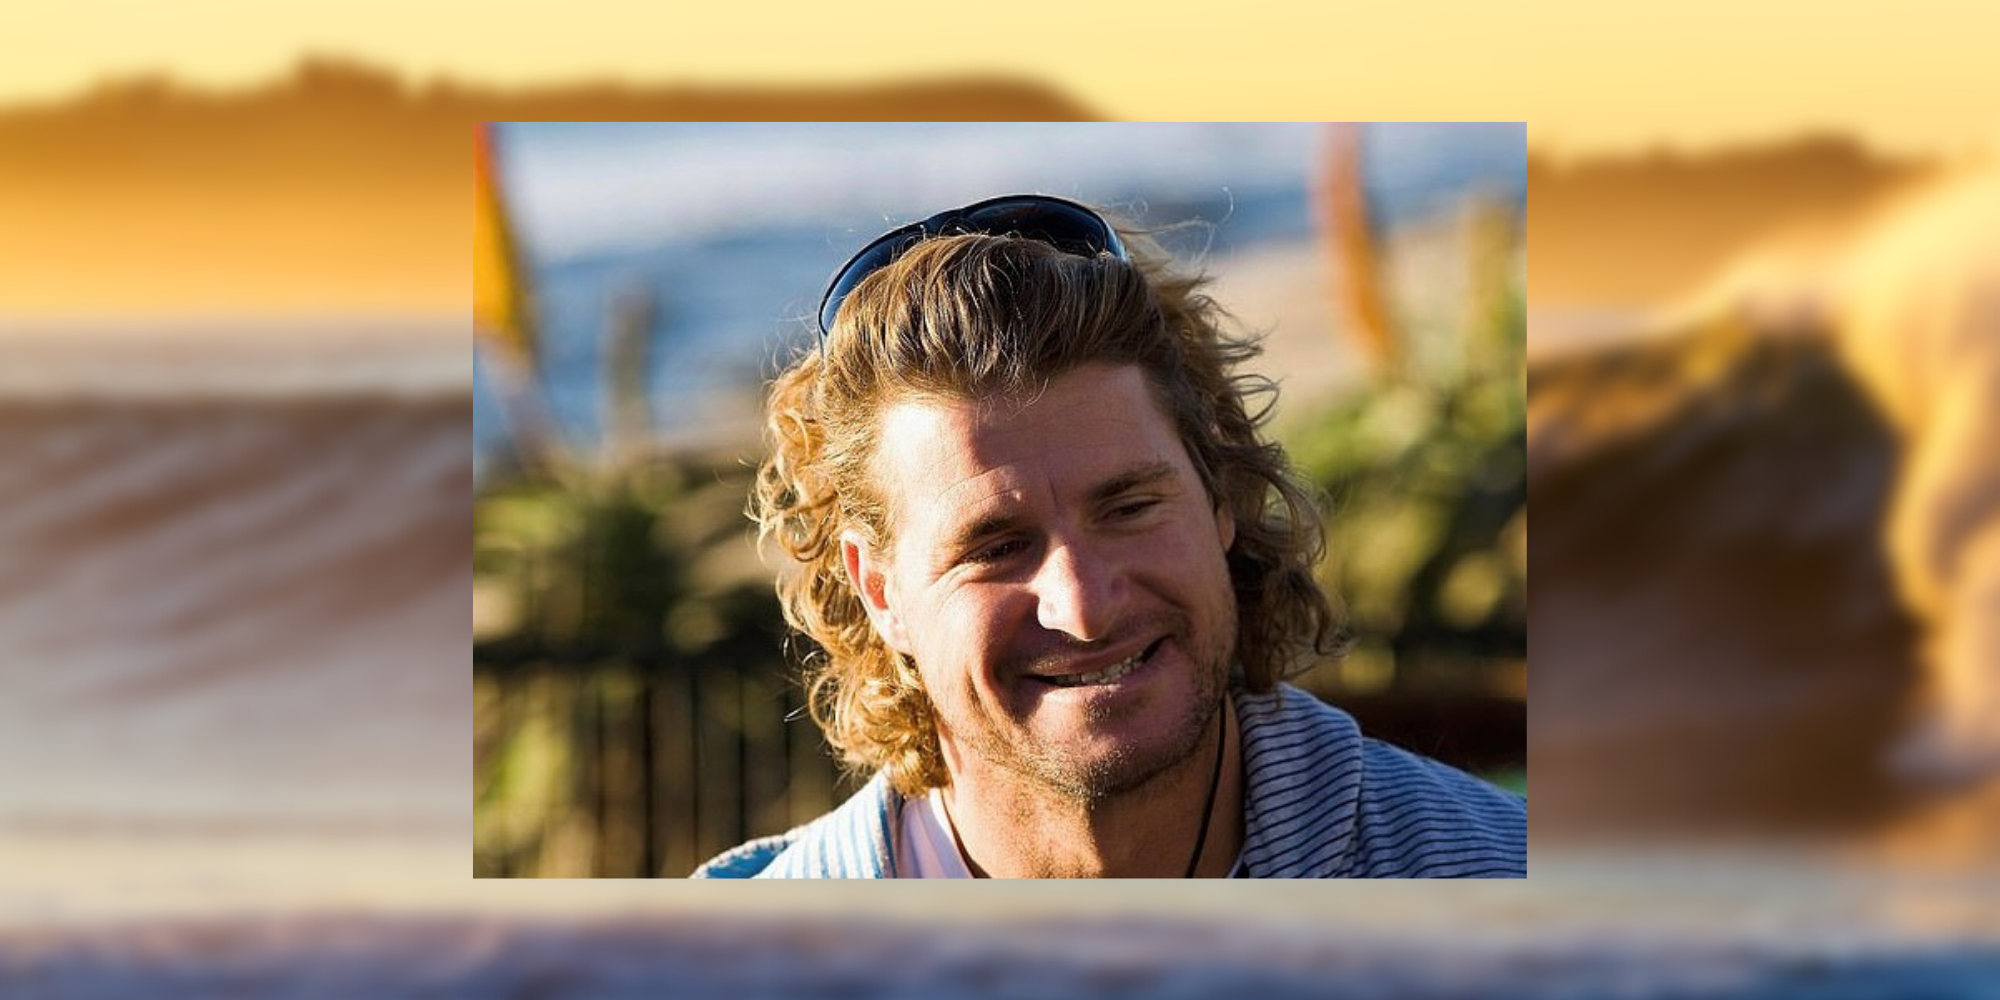 Australian Surfing Legend Mark 'Occy' Occhilupo Opens Up About His Battle with Alcohol Addiction